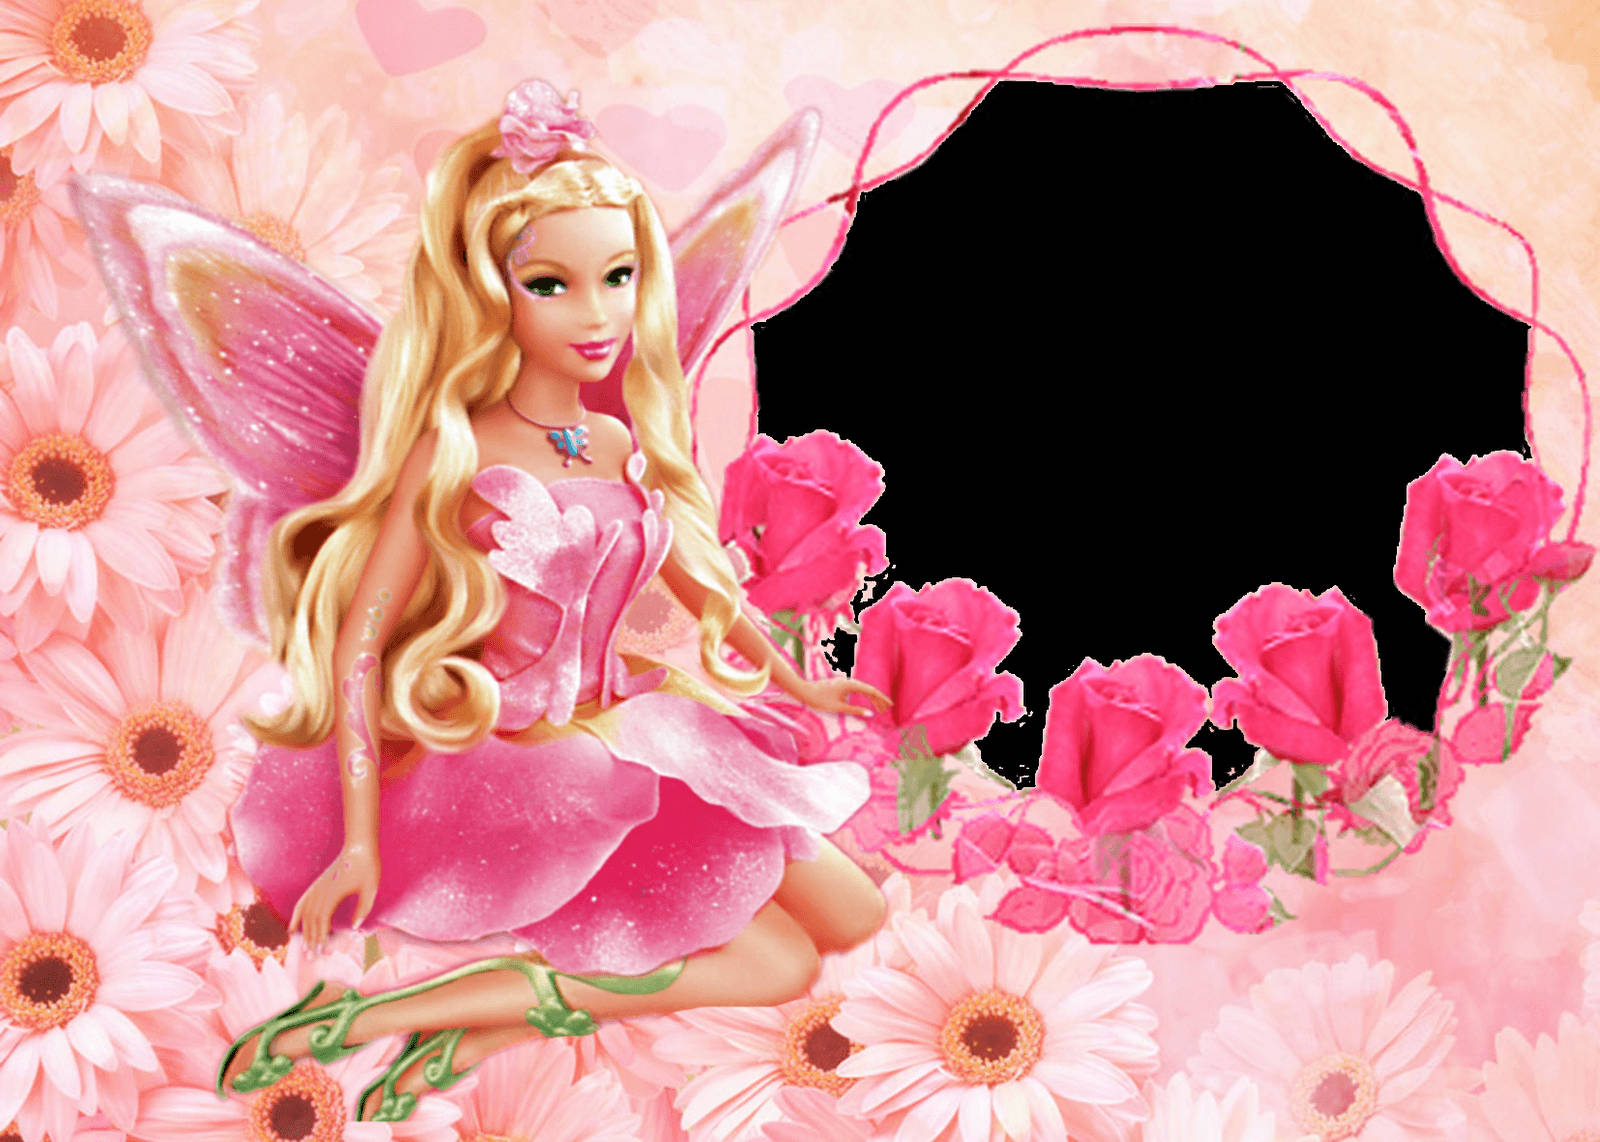 Celebrating Barbie's Beauty with Roses Wallpaper